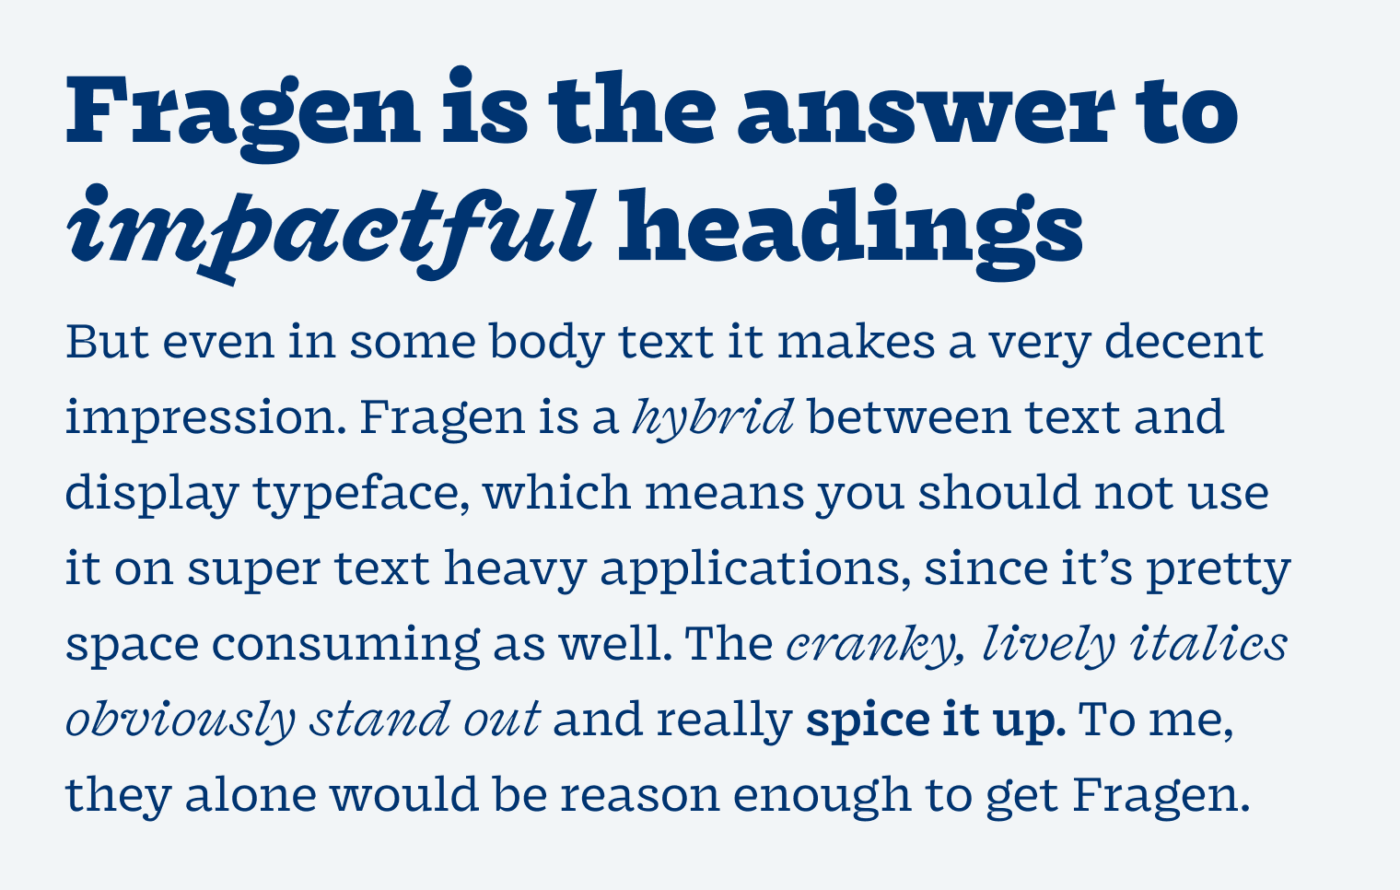 Fragen is the answer to impactful headings. But even in some body text it makes a very decent  impression. Fragen is a hybrid between text and display typeface, which means you should not use it on super text heavy applications, since it’s pretty space consuming as well. The cranky, lively italics obviously stand out and really spice it up. To me, they alone would be reason enough to get Fragen.